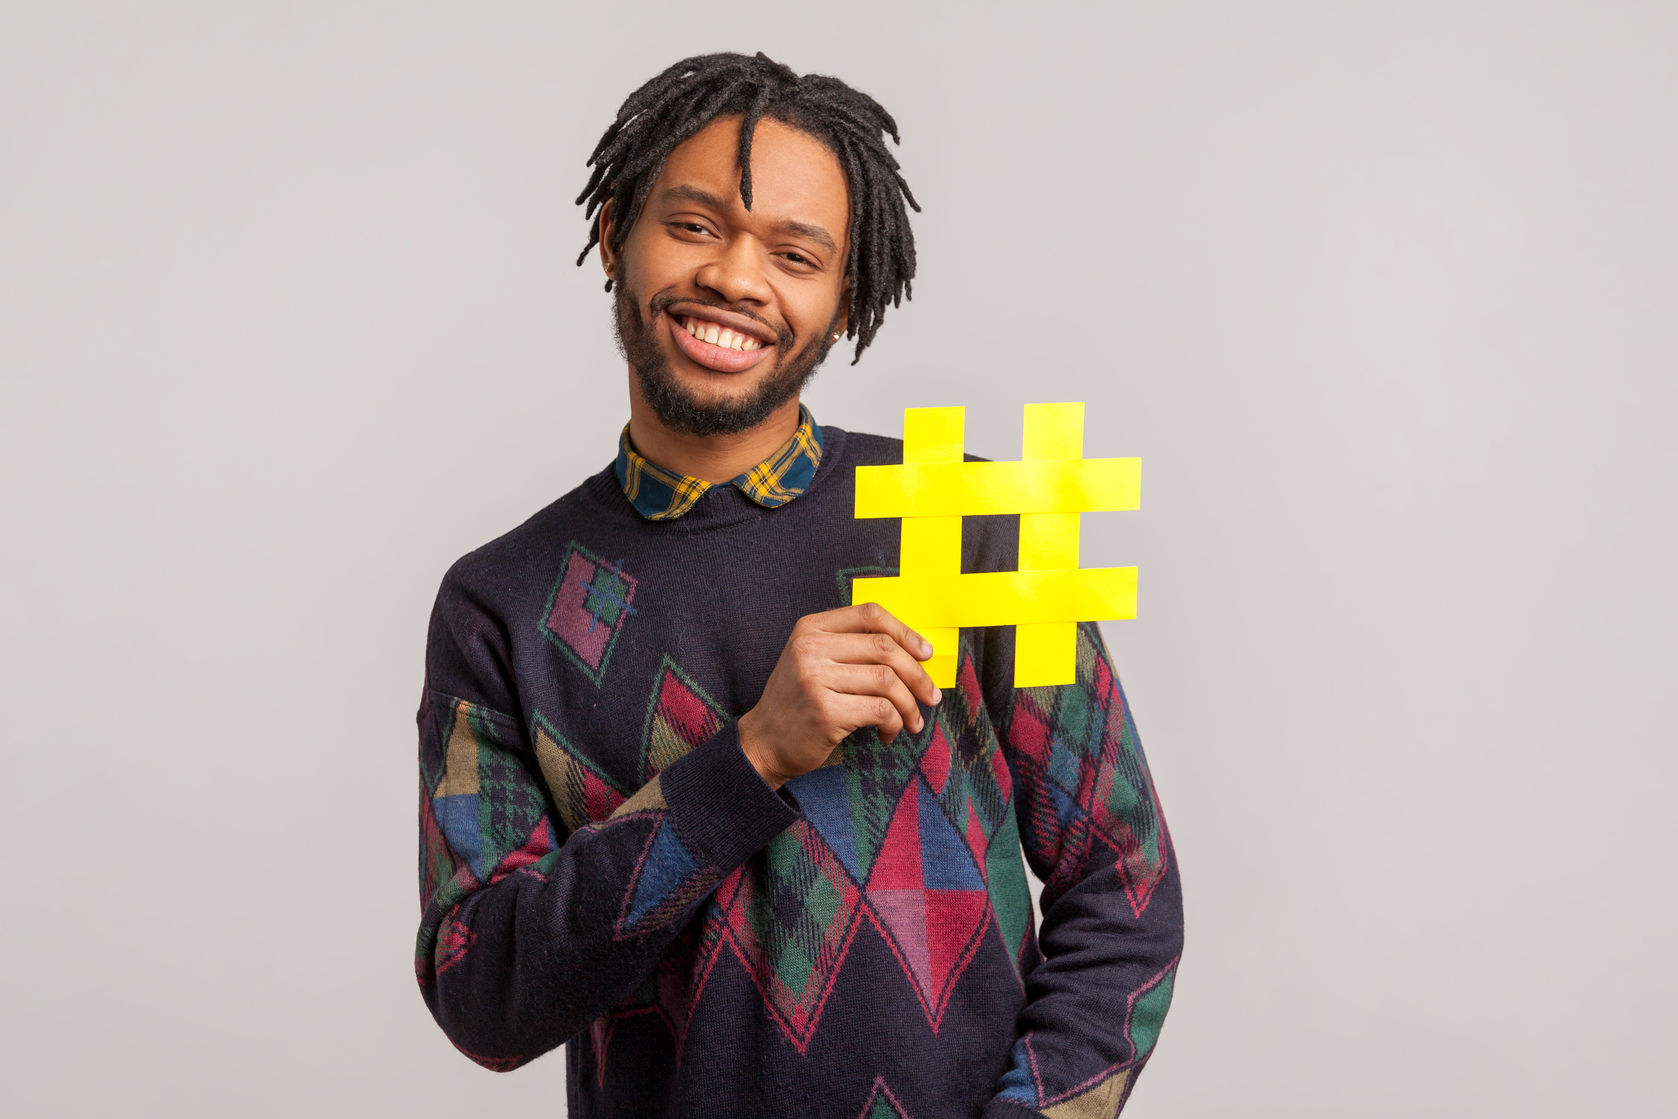 How to use hashtags effectively as a business